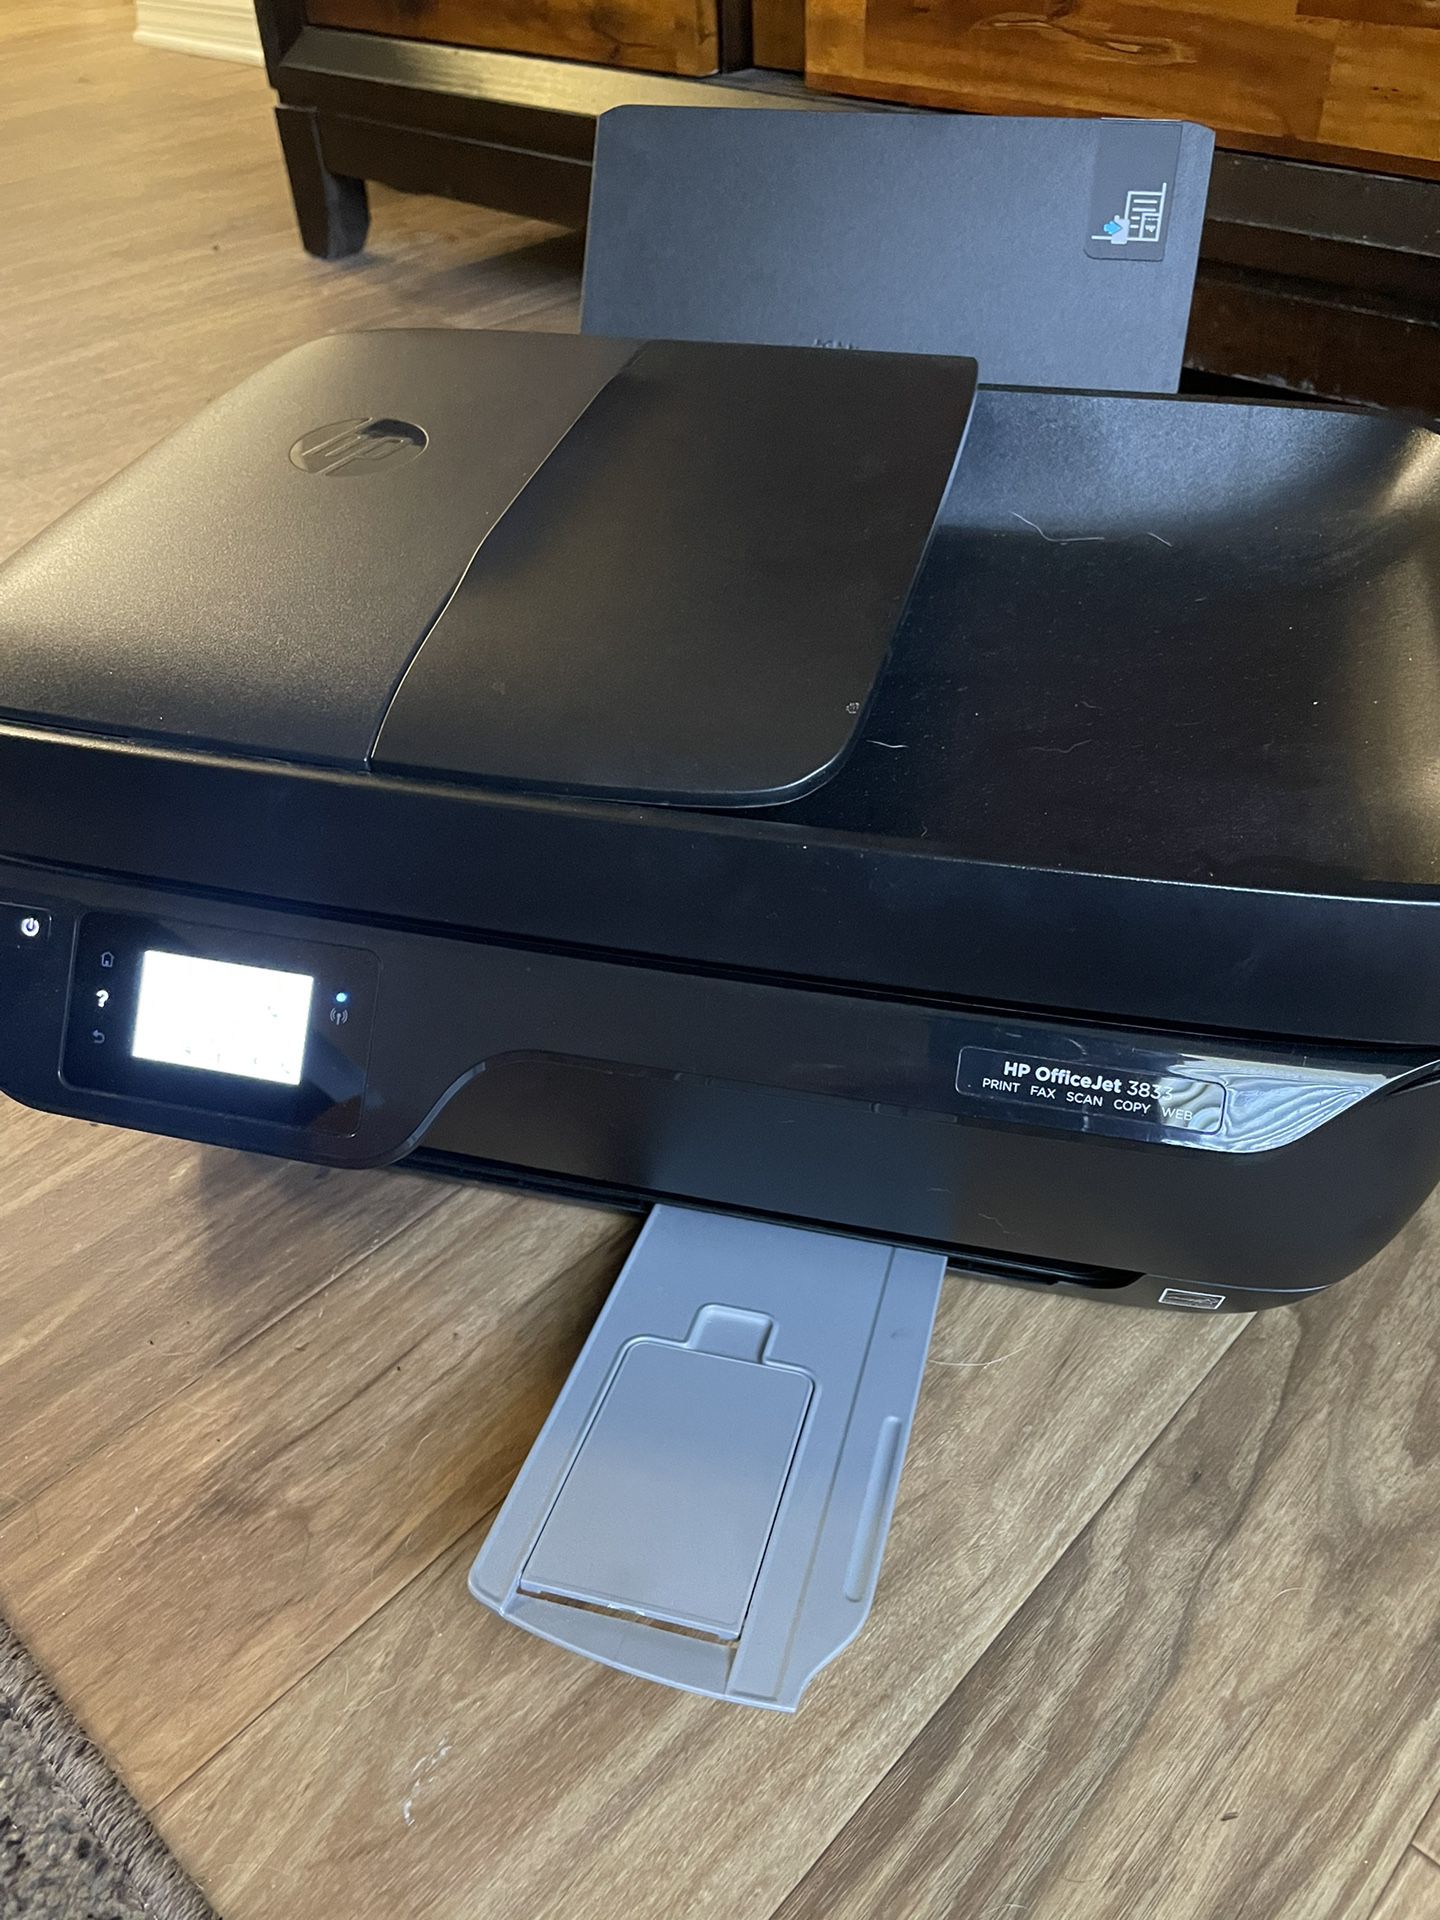 HP Office Jet 3833 All-in-one Printer